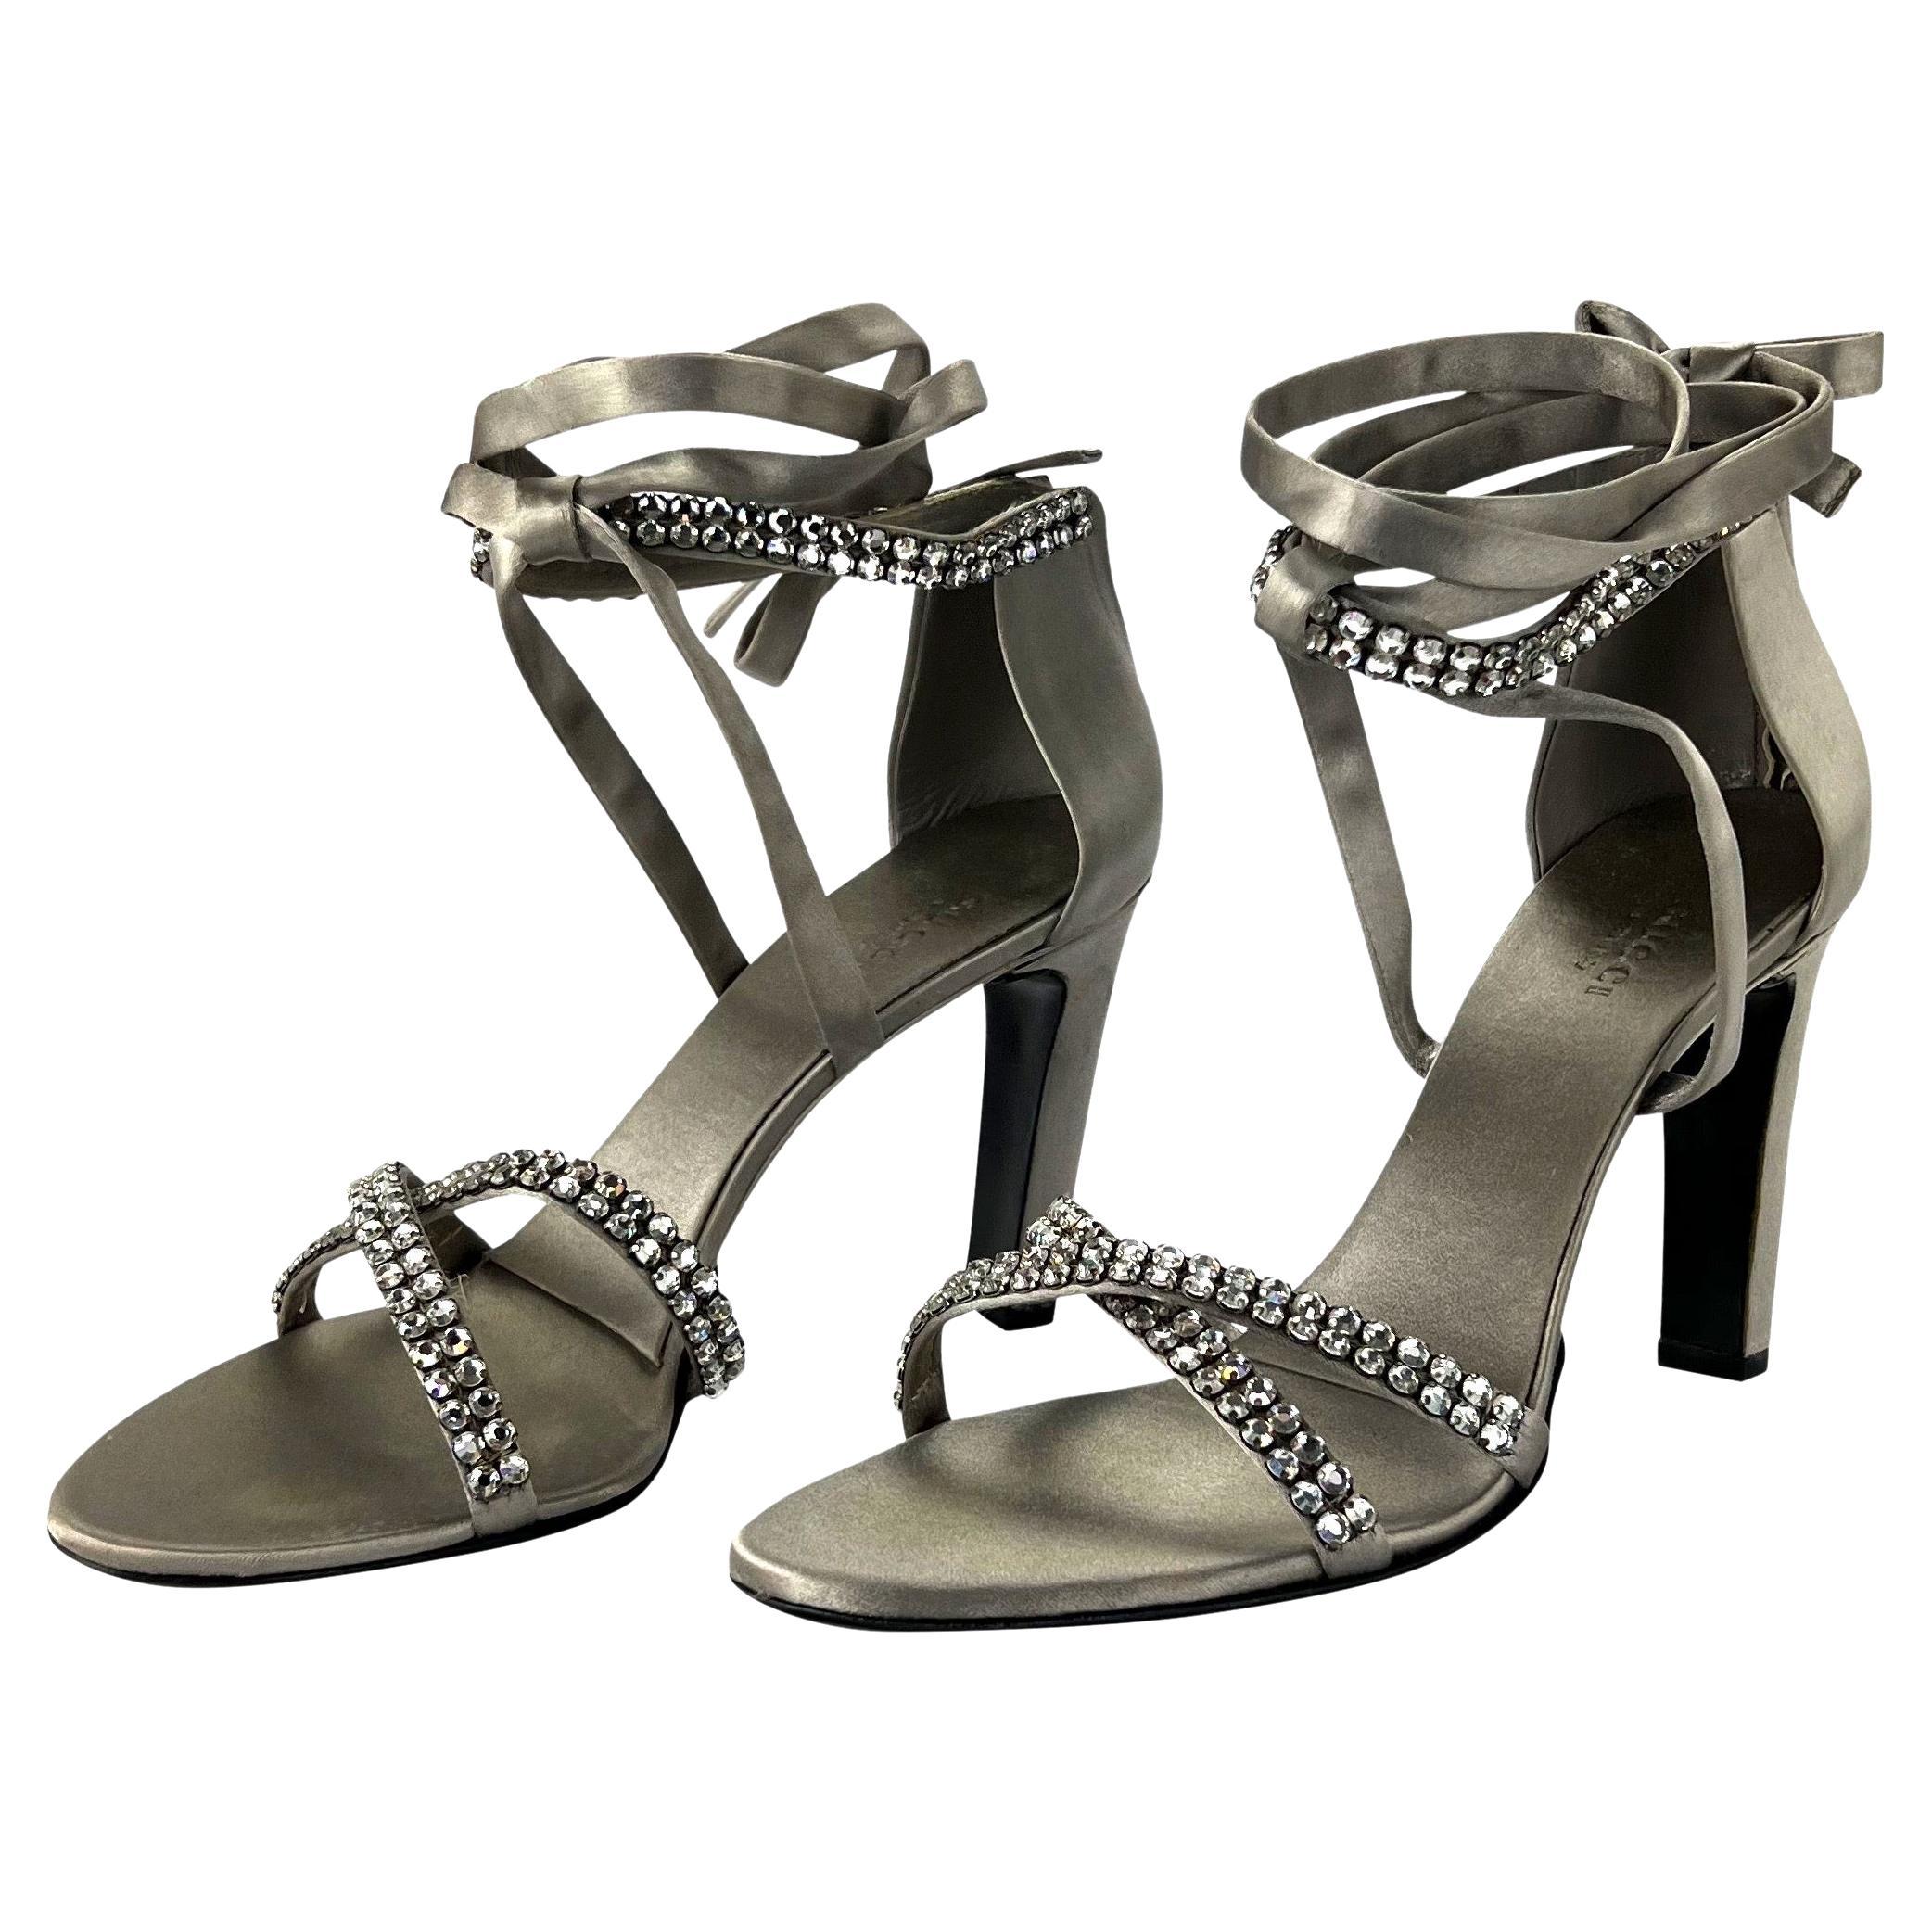 F/W 2004 Gucci Tom Ford Silver Satin Crystal Lace- Up Heels Size 8B In Excellent Condition For Sale In West Hollywood, CA